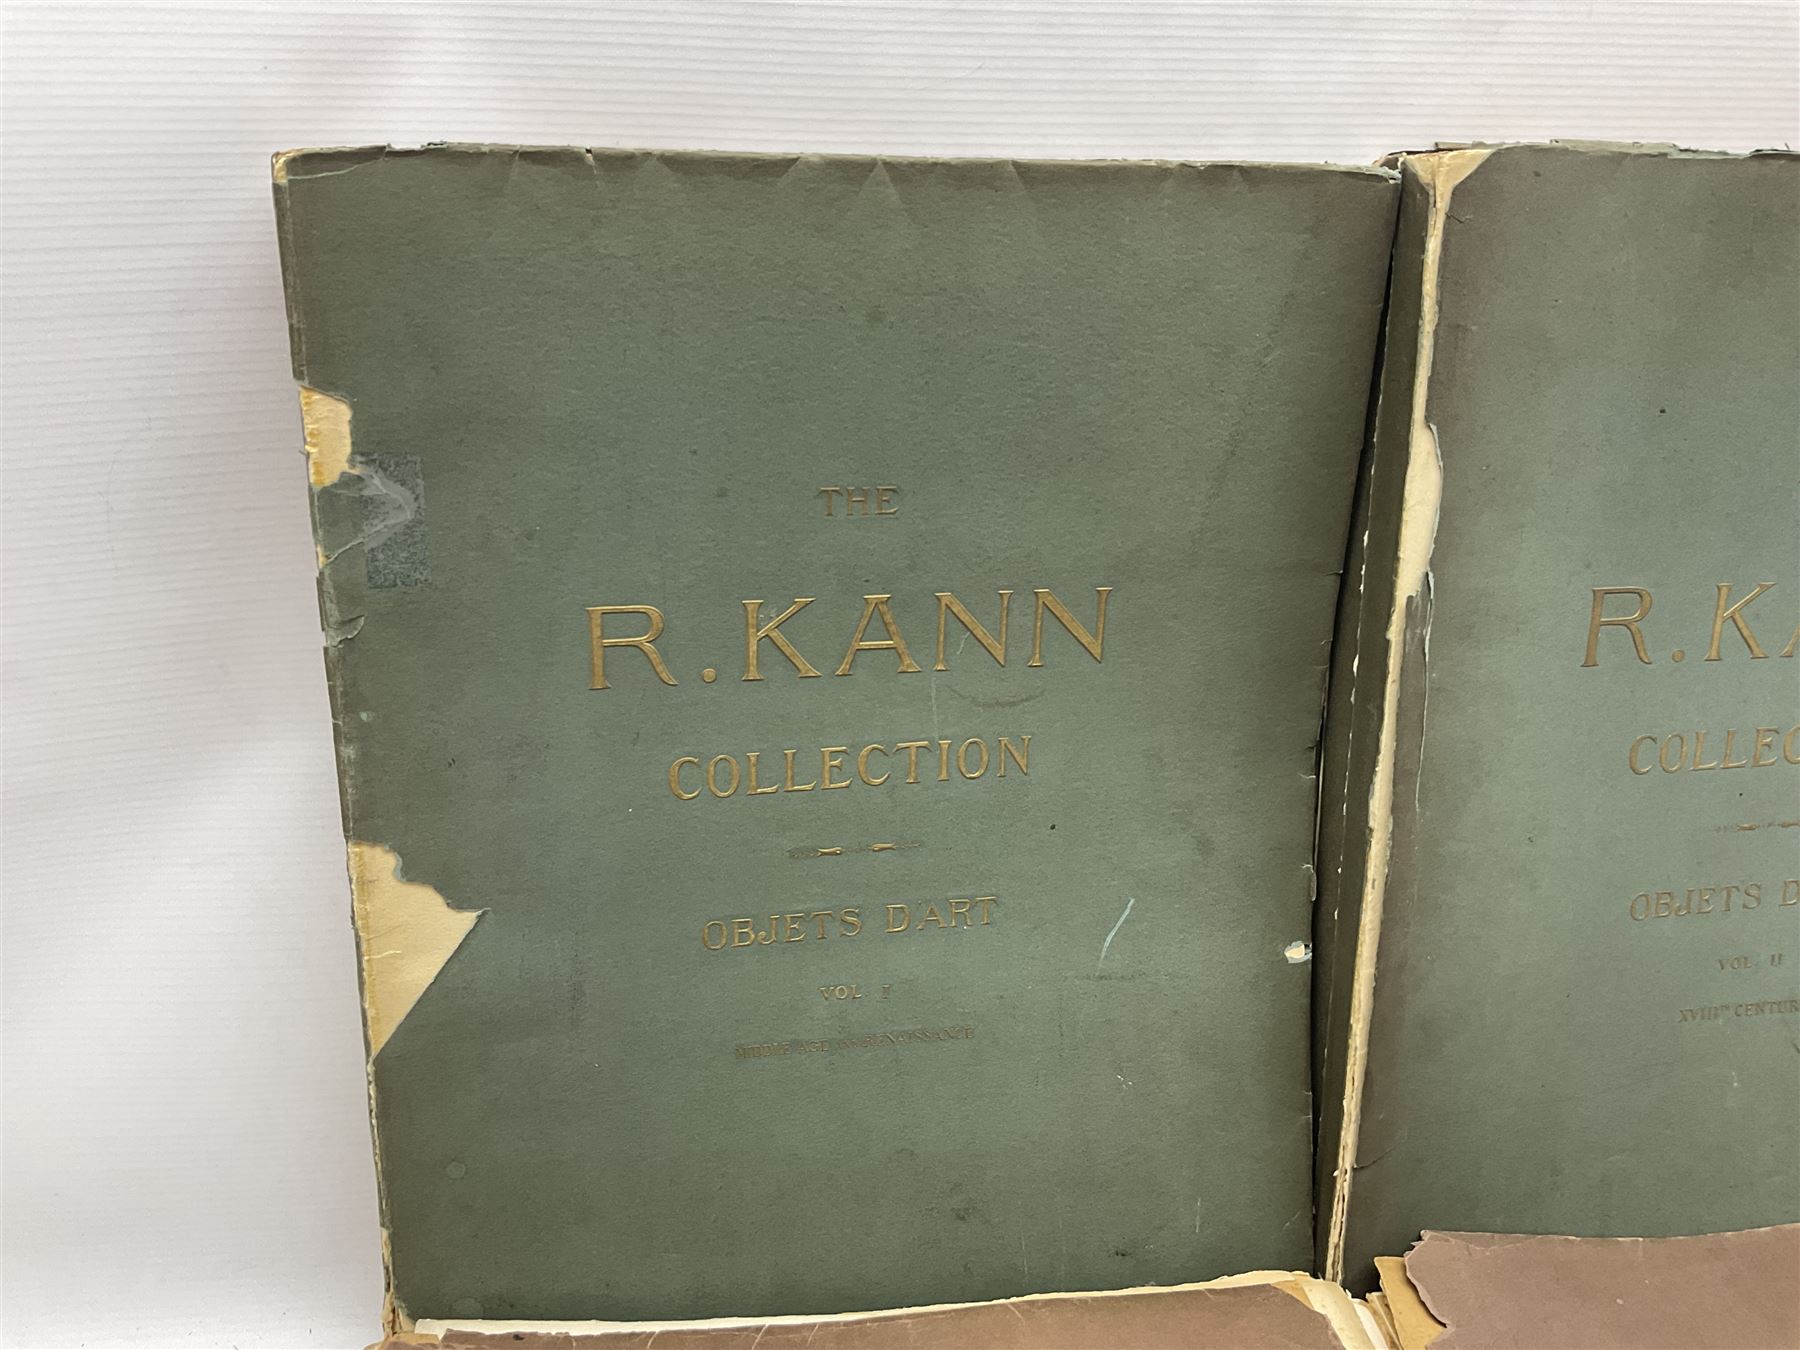 The R. Kann Collection - Image 2 of 20